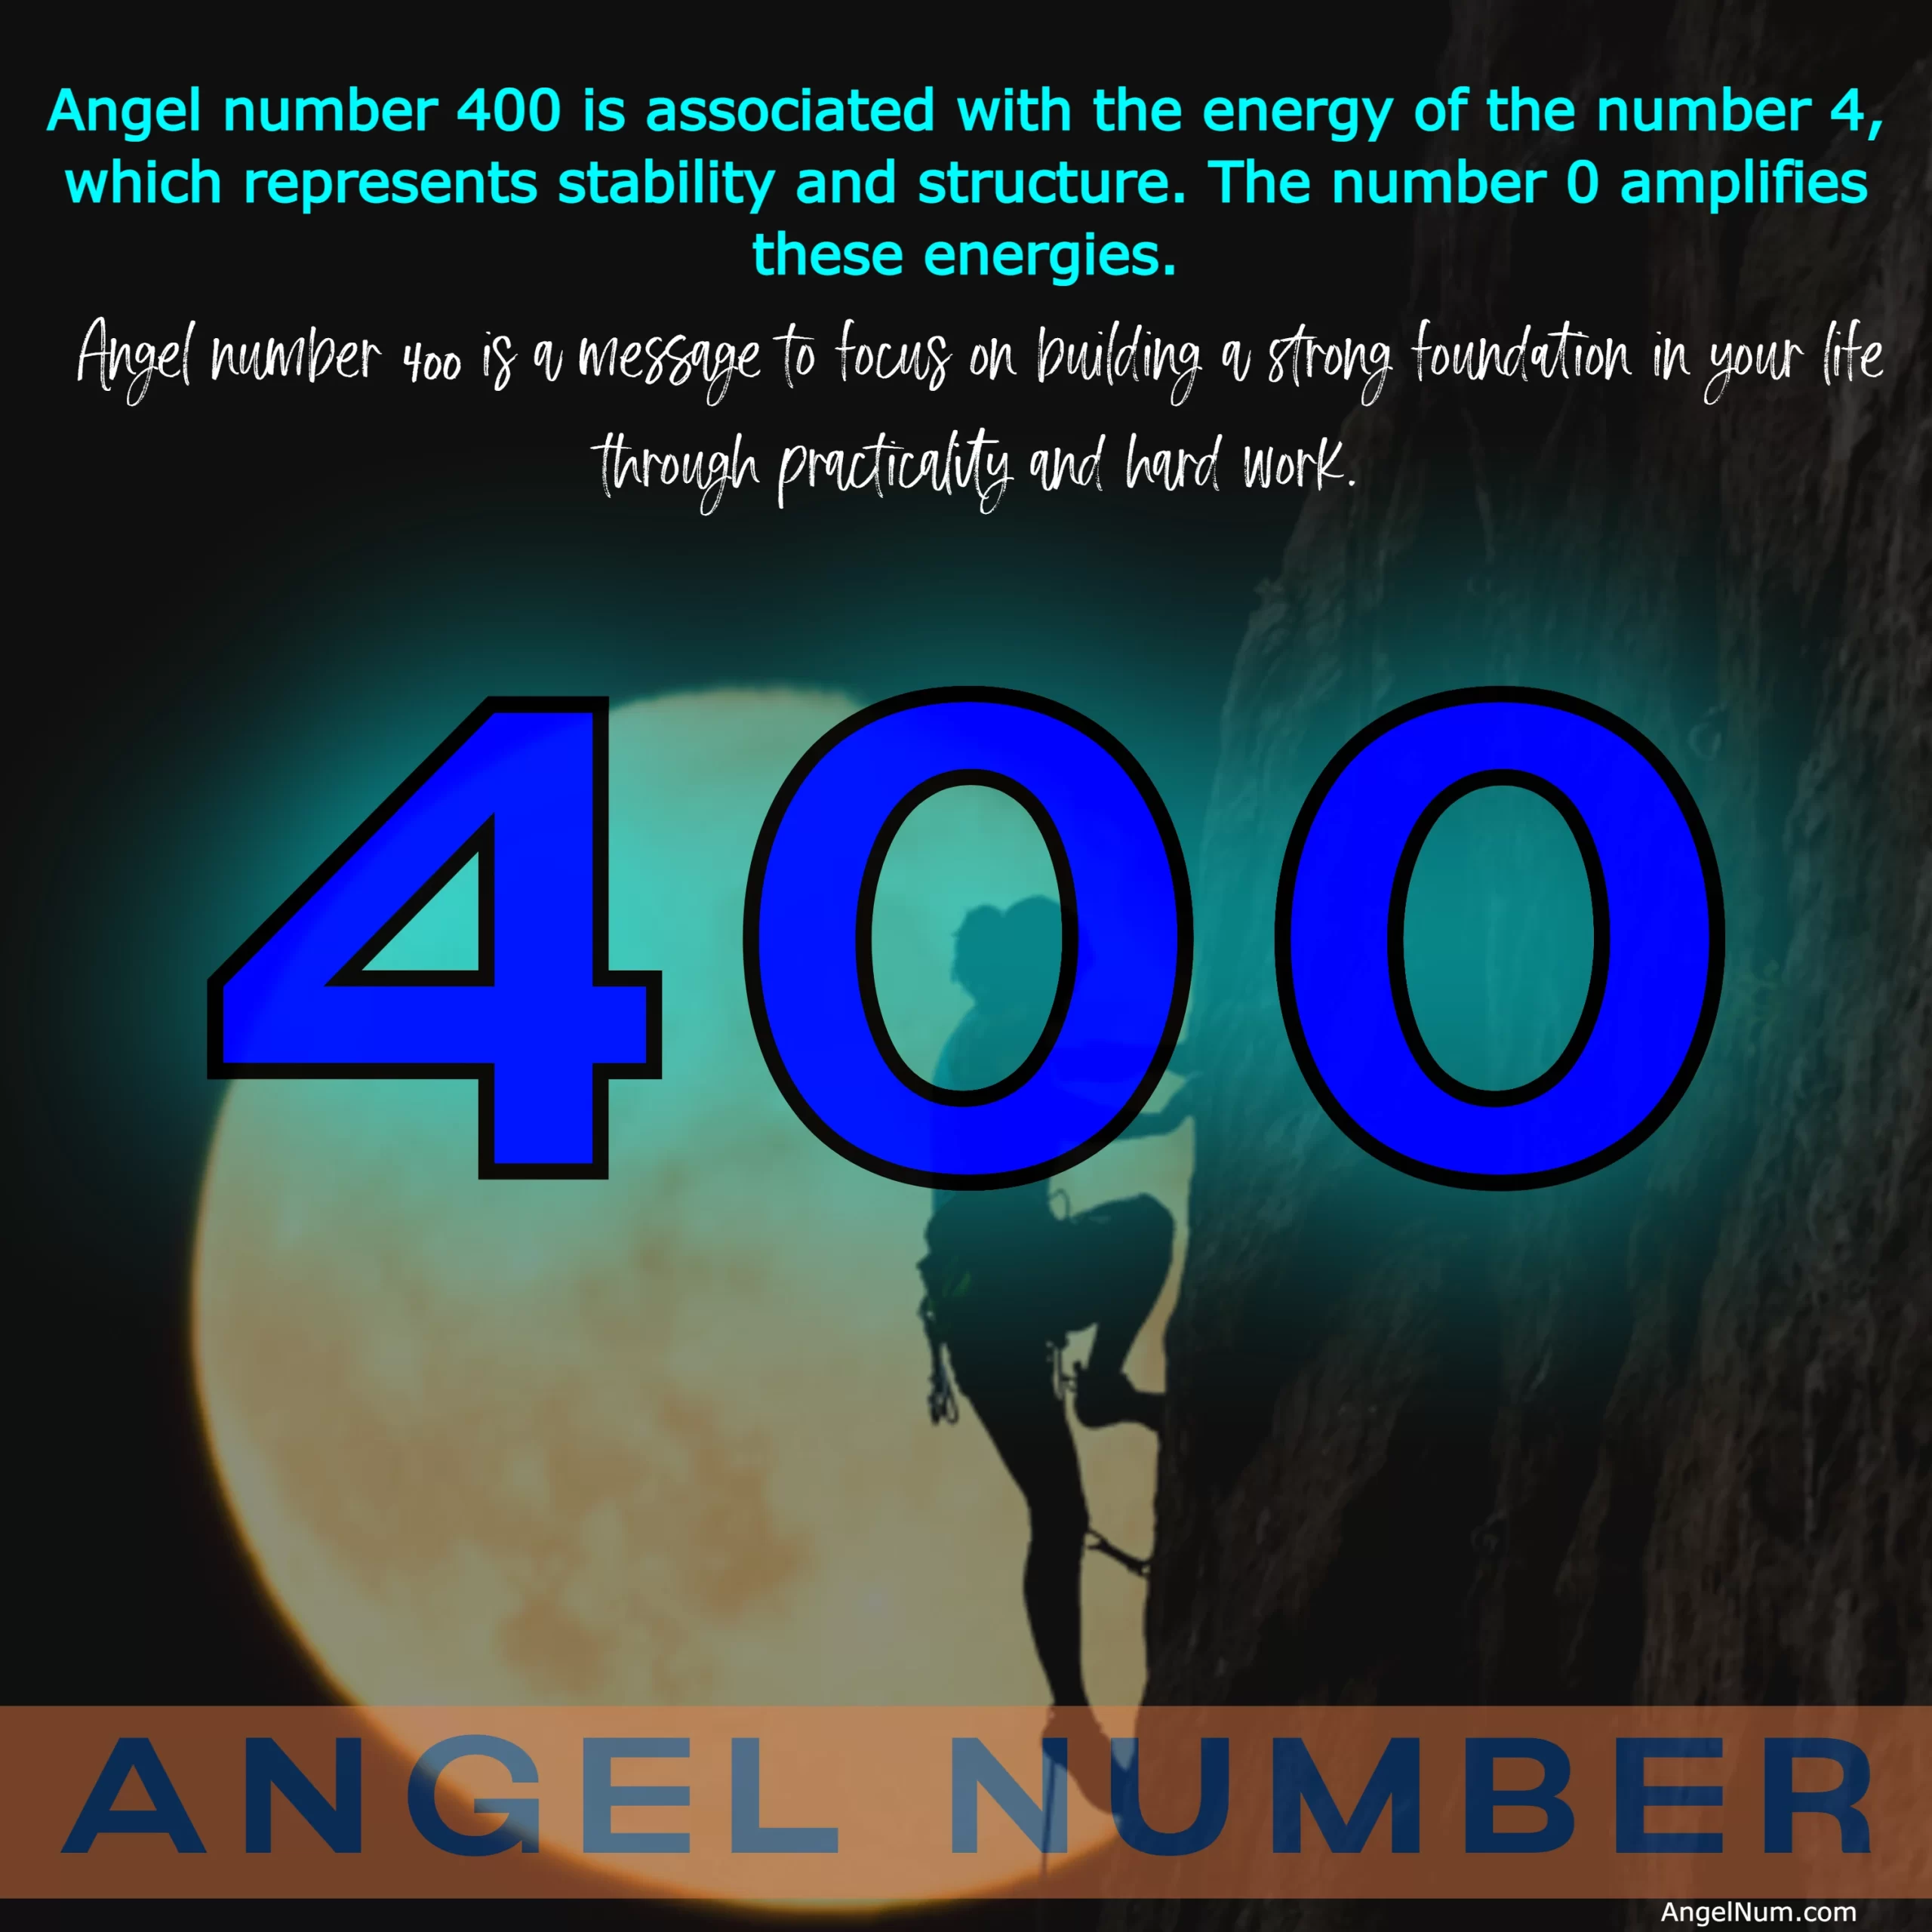 Angel Number 400: Building a Strong Foundation Through Practicality